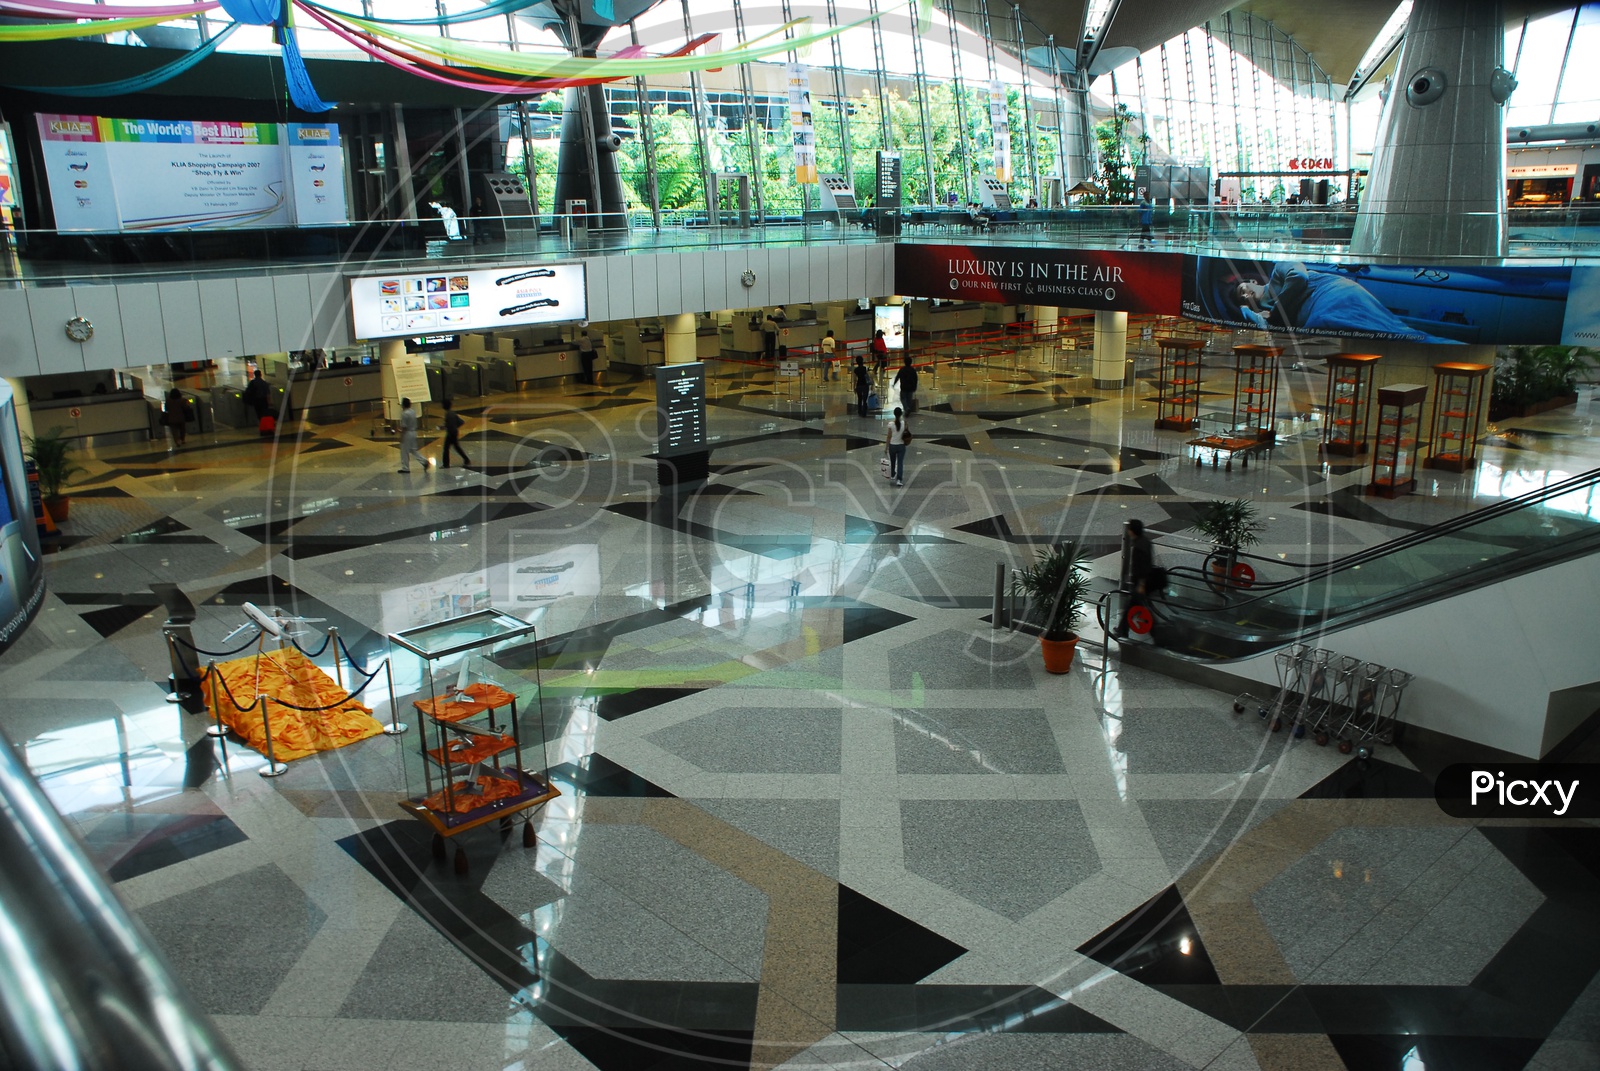 Airline Passengers in an Airport Terminal For Travel Concept